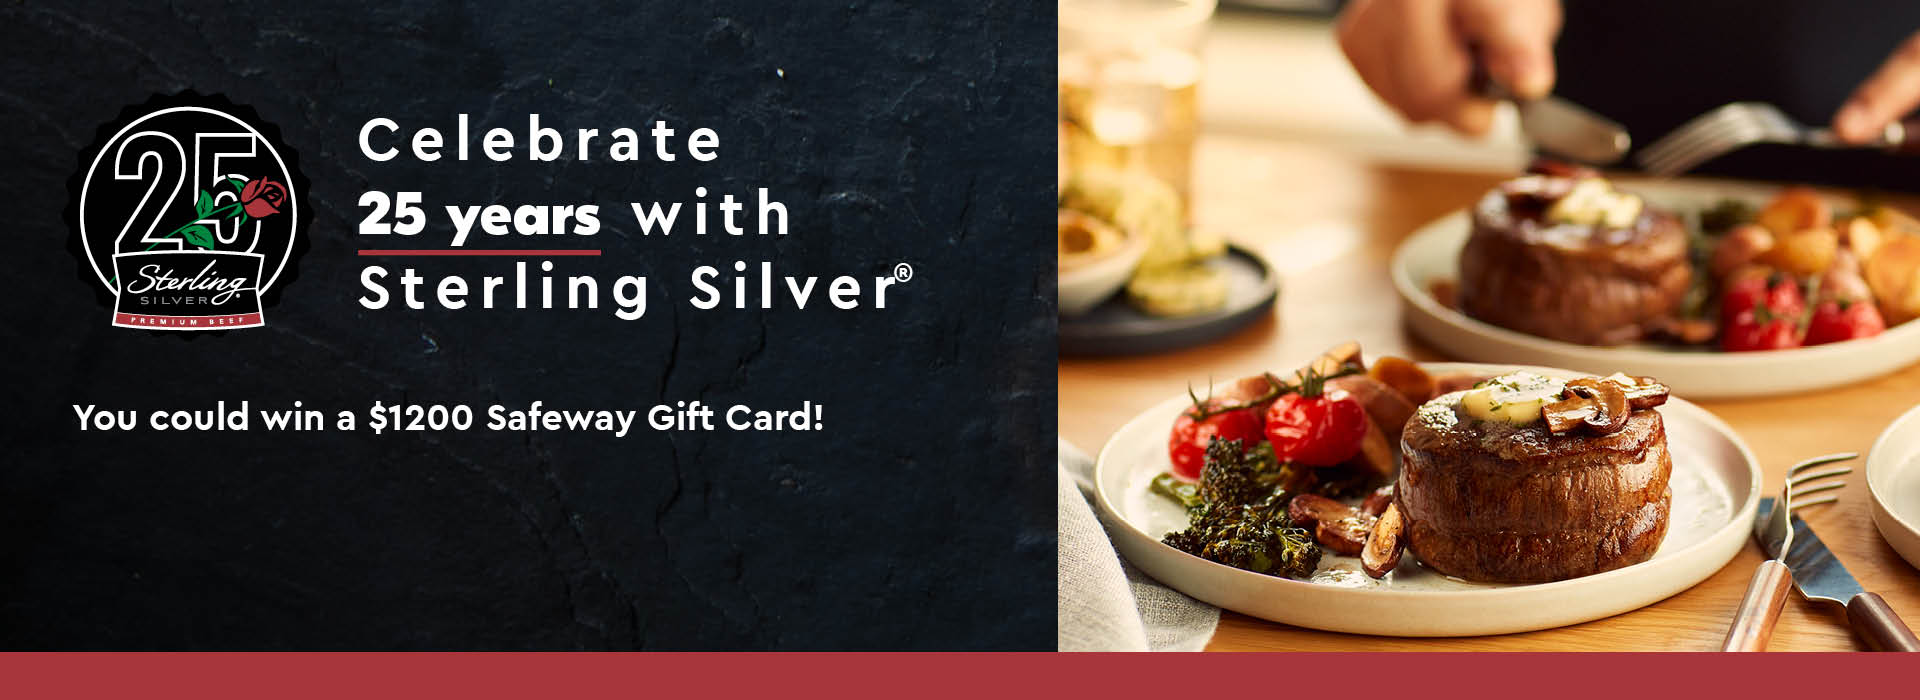 Sterling Silver 25th Anniversary Contest